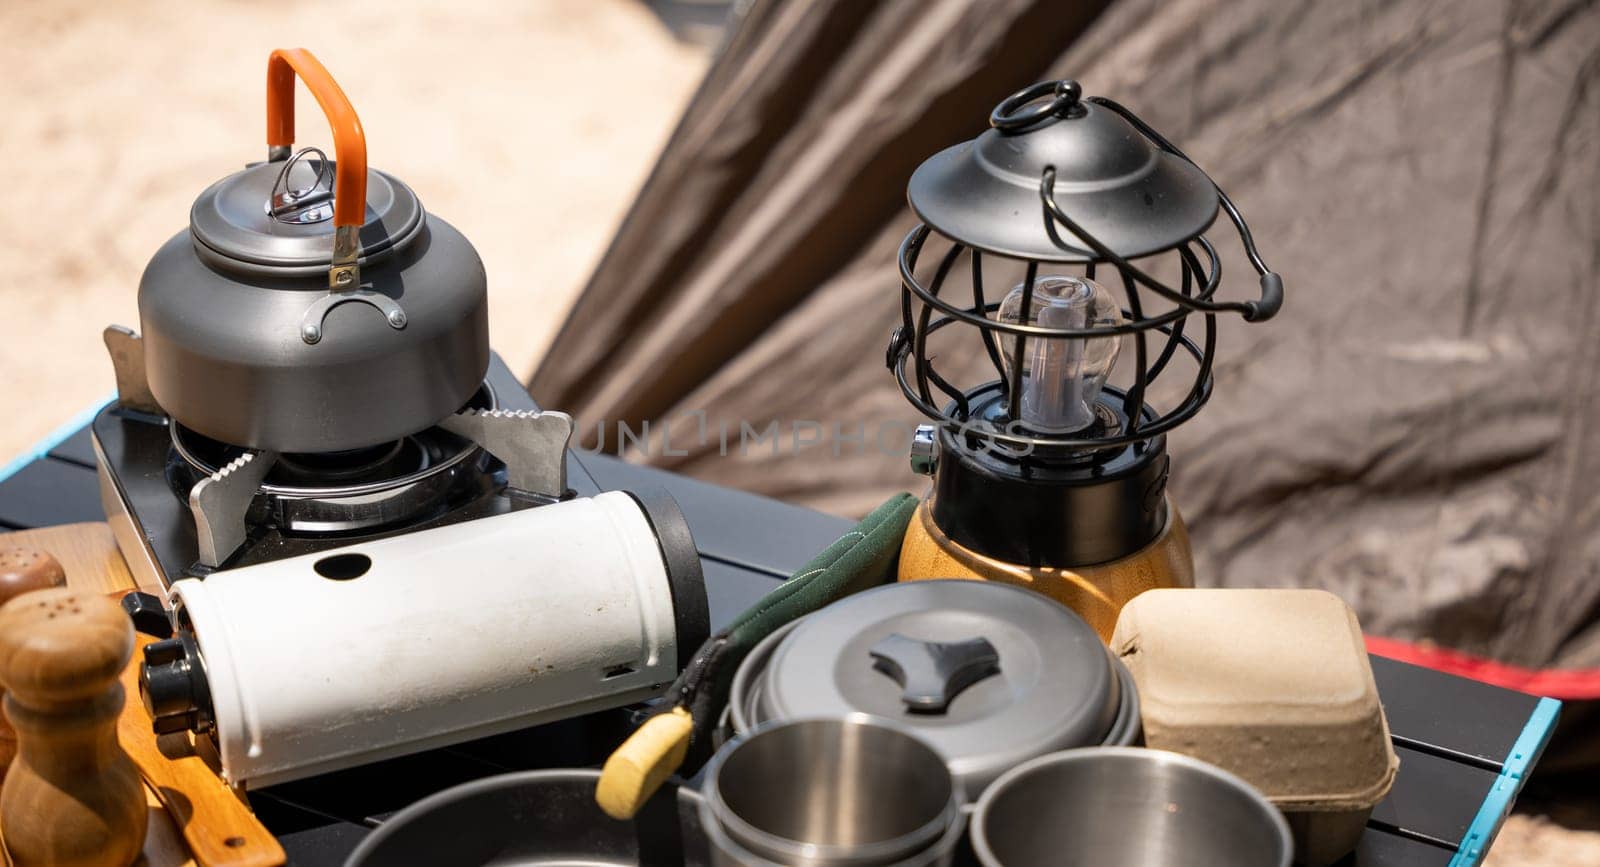 Cooking gear for a tranquil beach campsite, kettle, pot, pan, gas stove, flashlight, and camera set on a table by the tent. Enjoy a serene camping experience amidst nature.